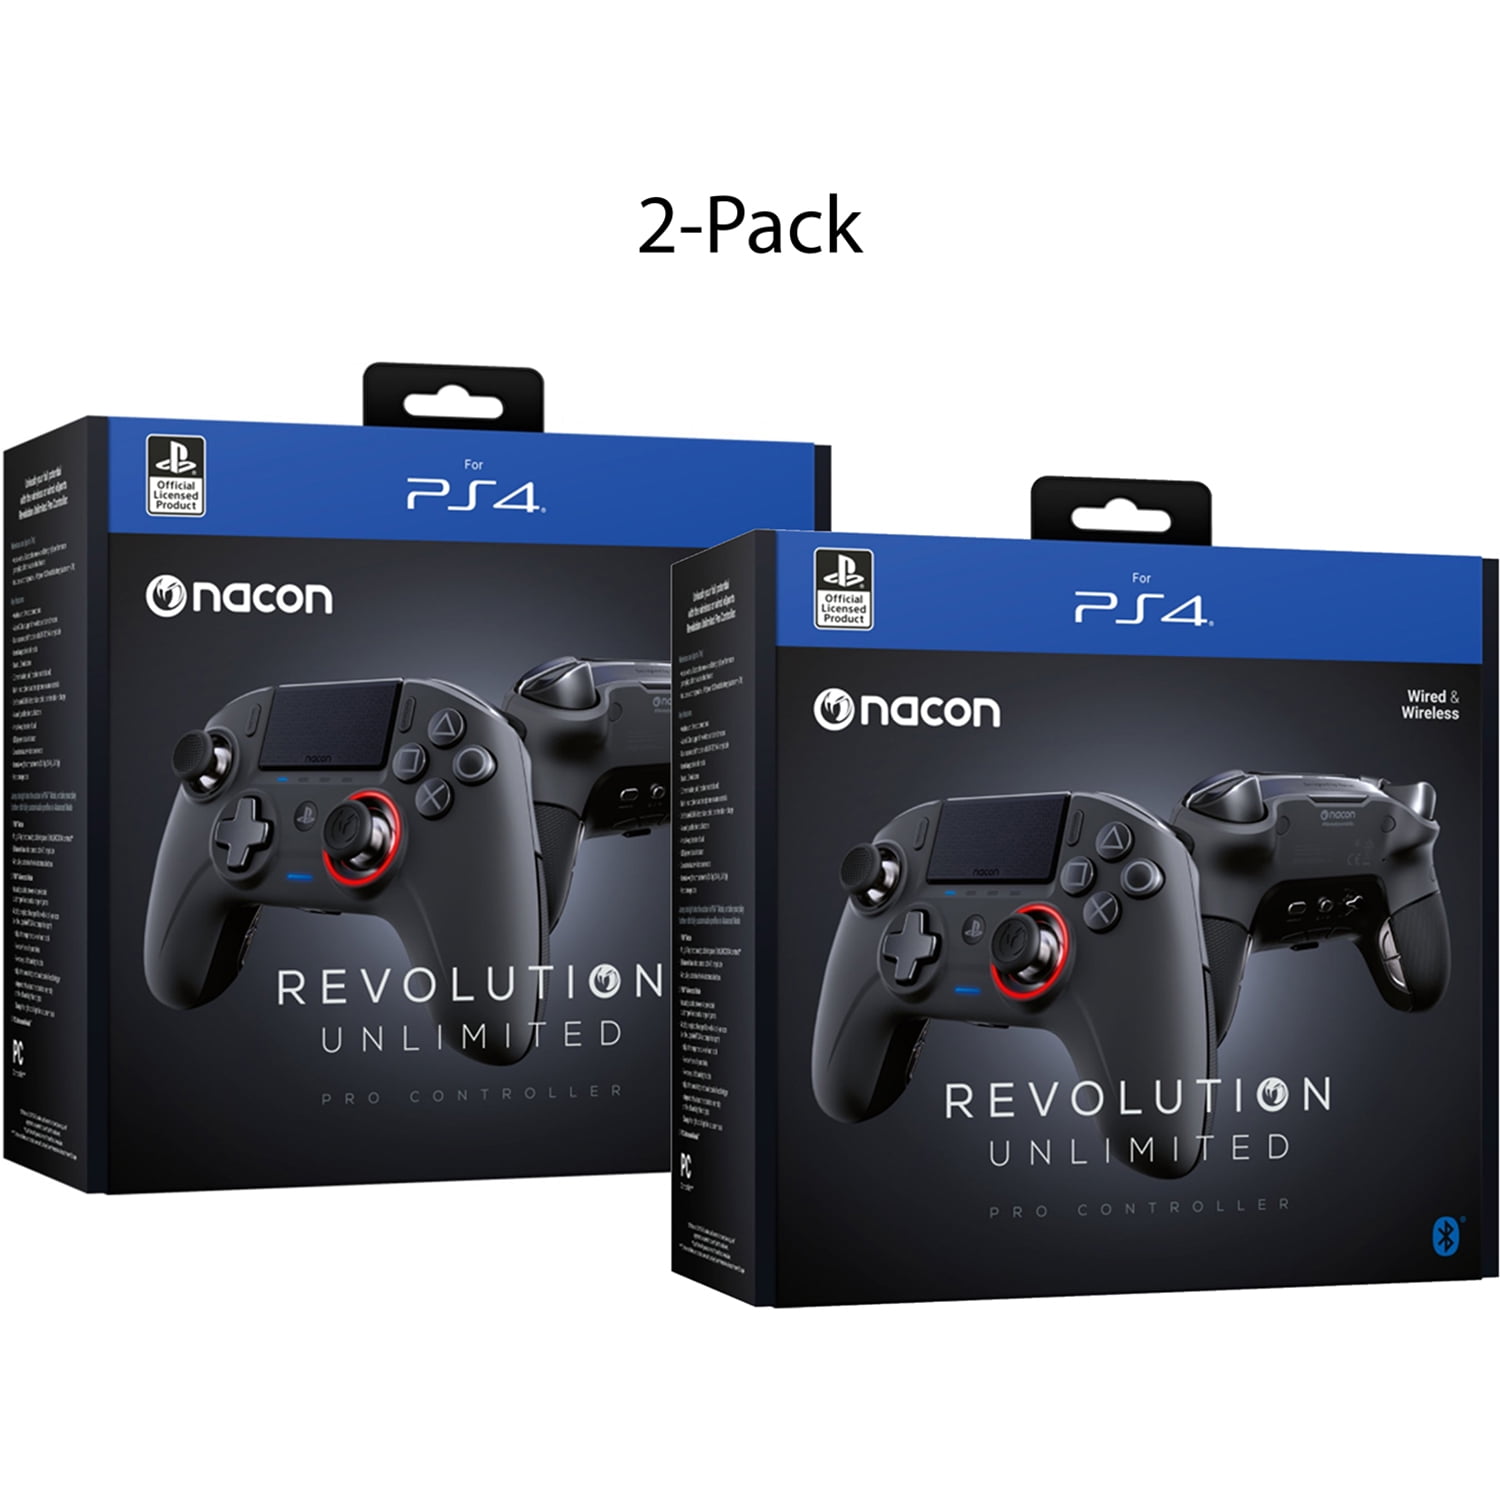 Controller Esports Revolution Unlimited Pro V3 PS4 PC - Wireless / Wired - Nacon-311608 2 Pack Team - Walmart.com